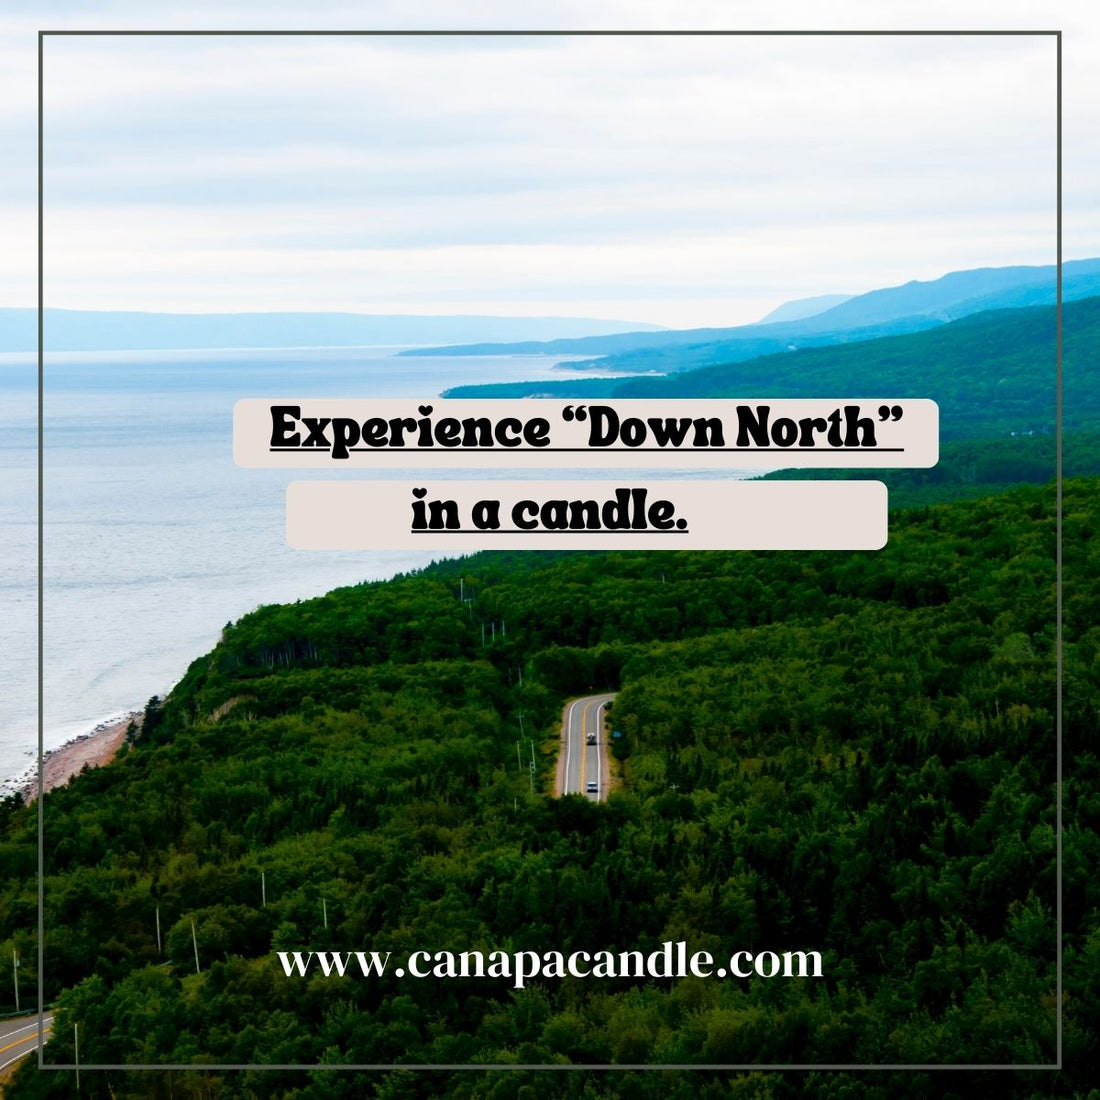 Introducing "Down North": A Voyage to Northern Cape Breton Island in a Candle